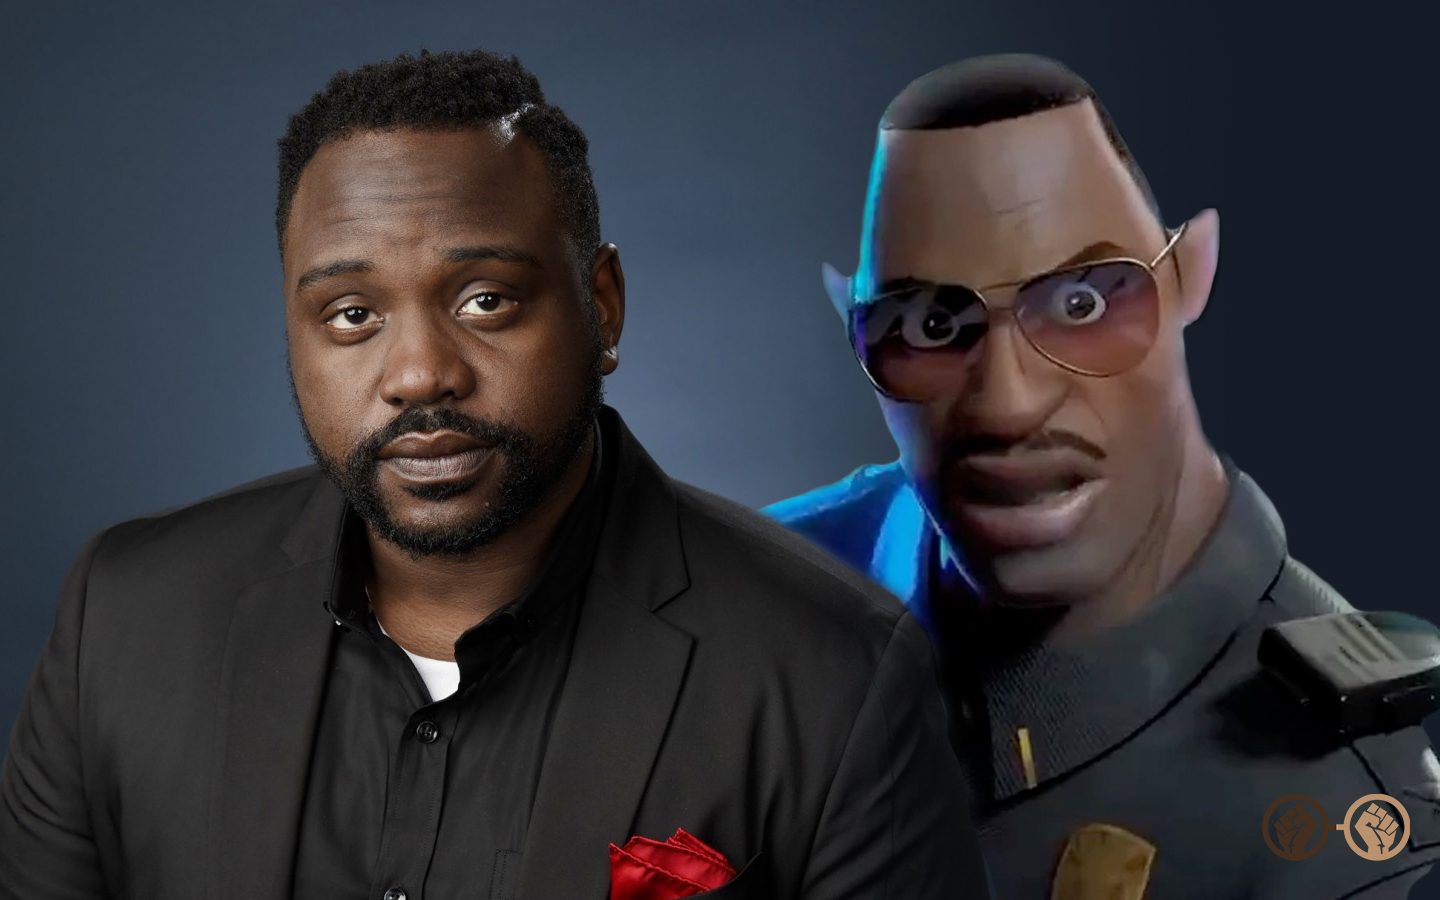 Interview: Brian Tyree Henry talks ‘Spider-Man: Into the Spider-Verse’, Stan Lee’s Legacy, Voicing Jefferson Davis, and More!